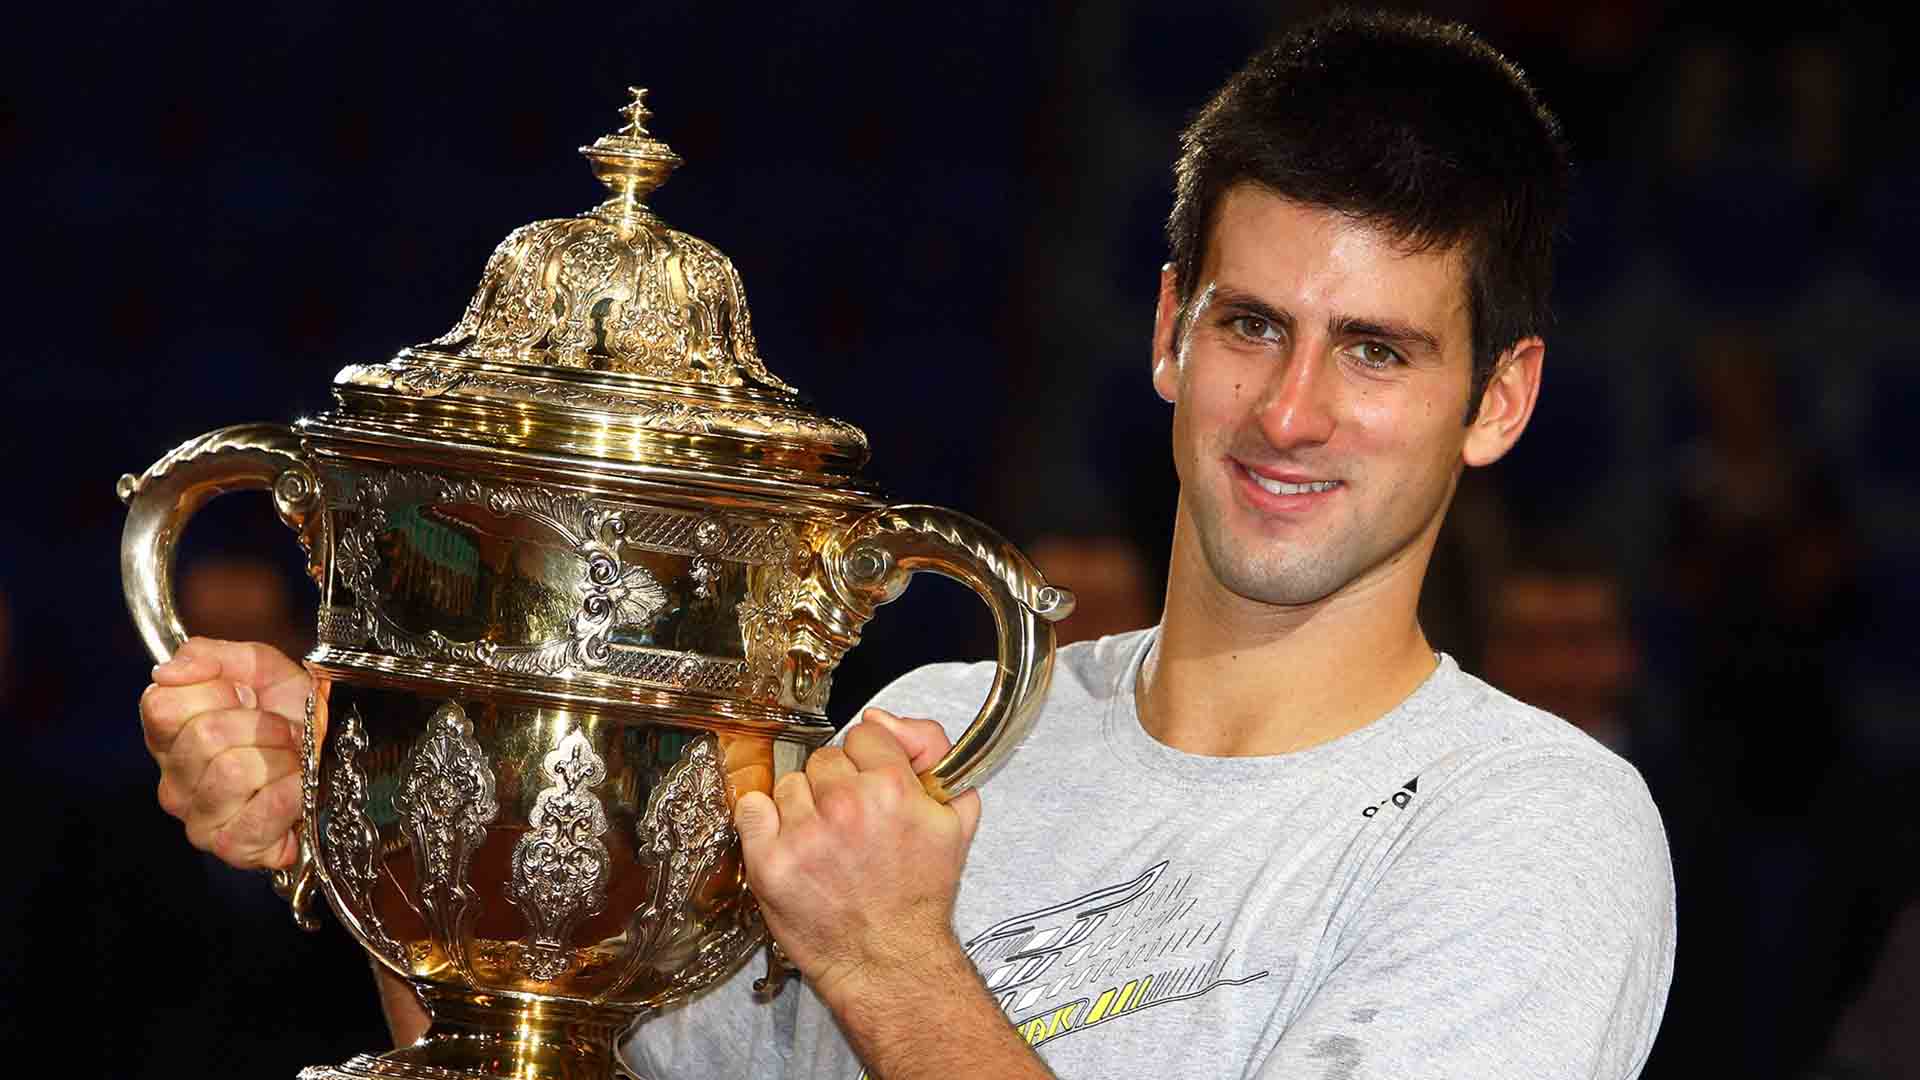 Novak Djokovic defeated three-time defending champion Roger Federer in three sets in the 2009 Swiss Indoors Basel final.